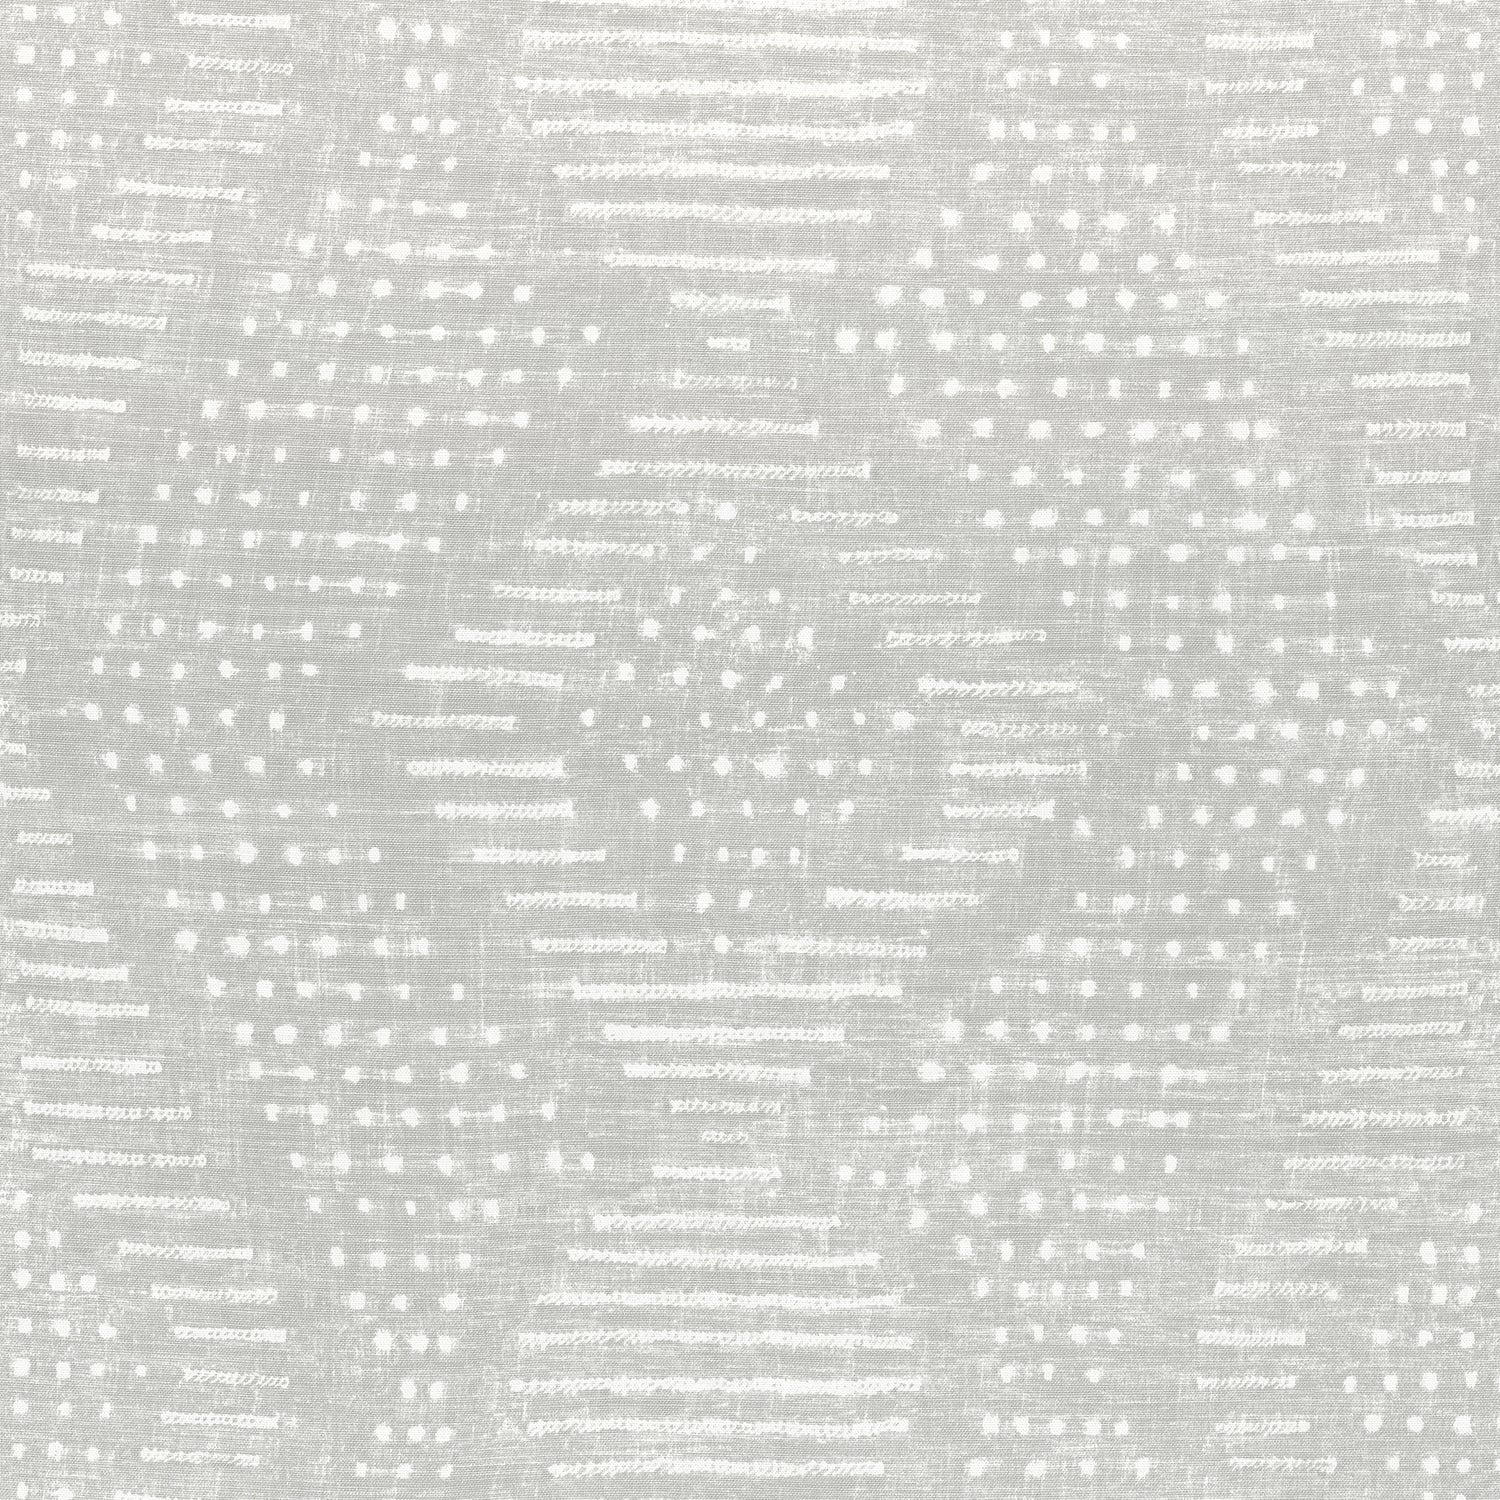 Mali fabric in grey color - pattern number AF78717 - by Anna French in the Palampore collection